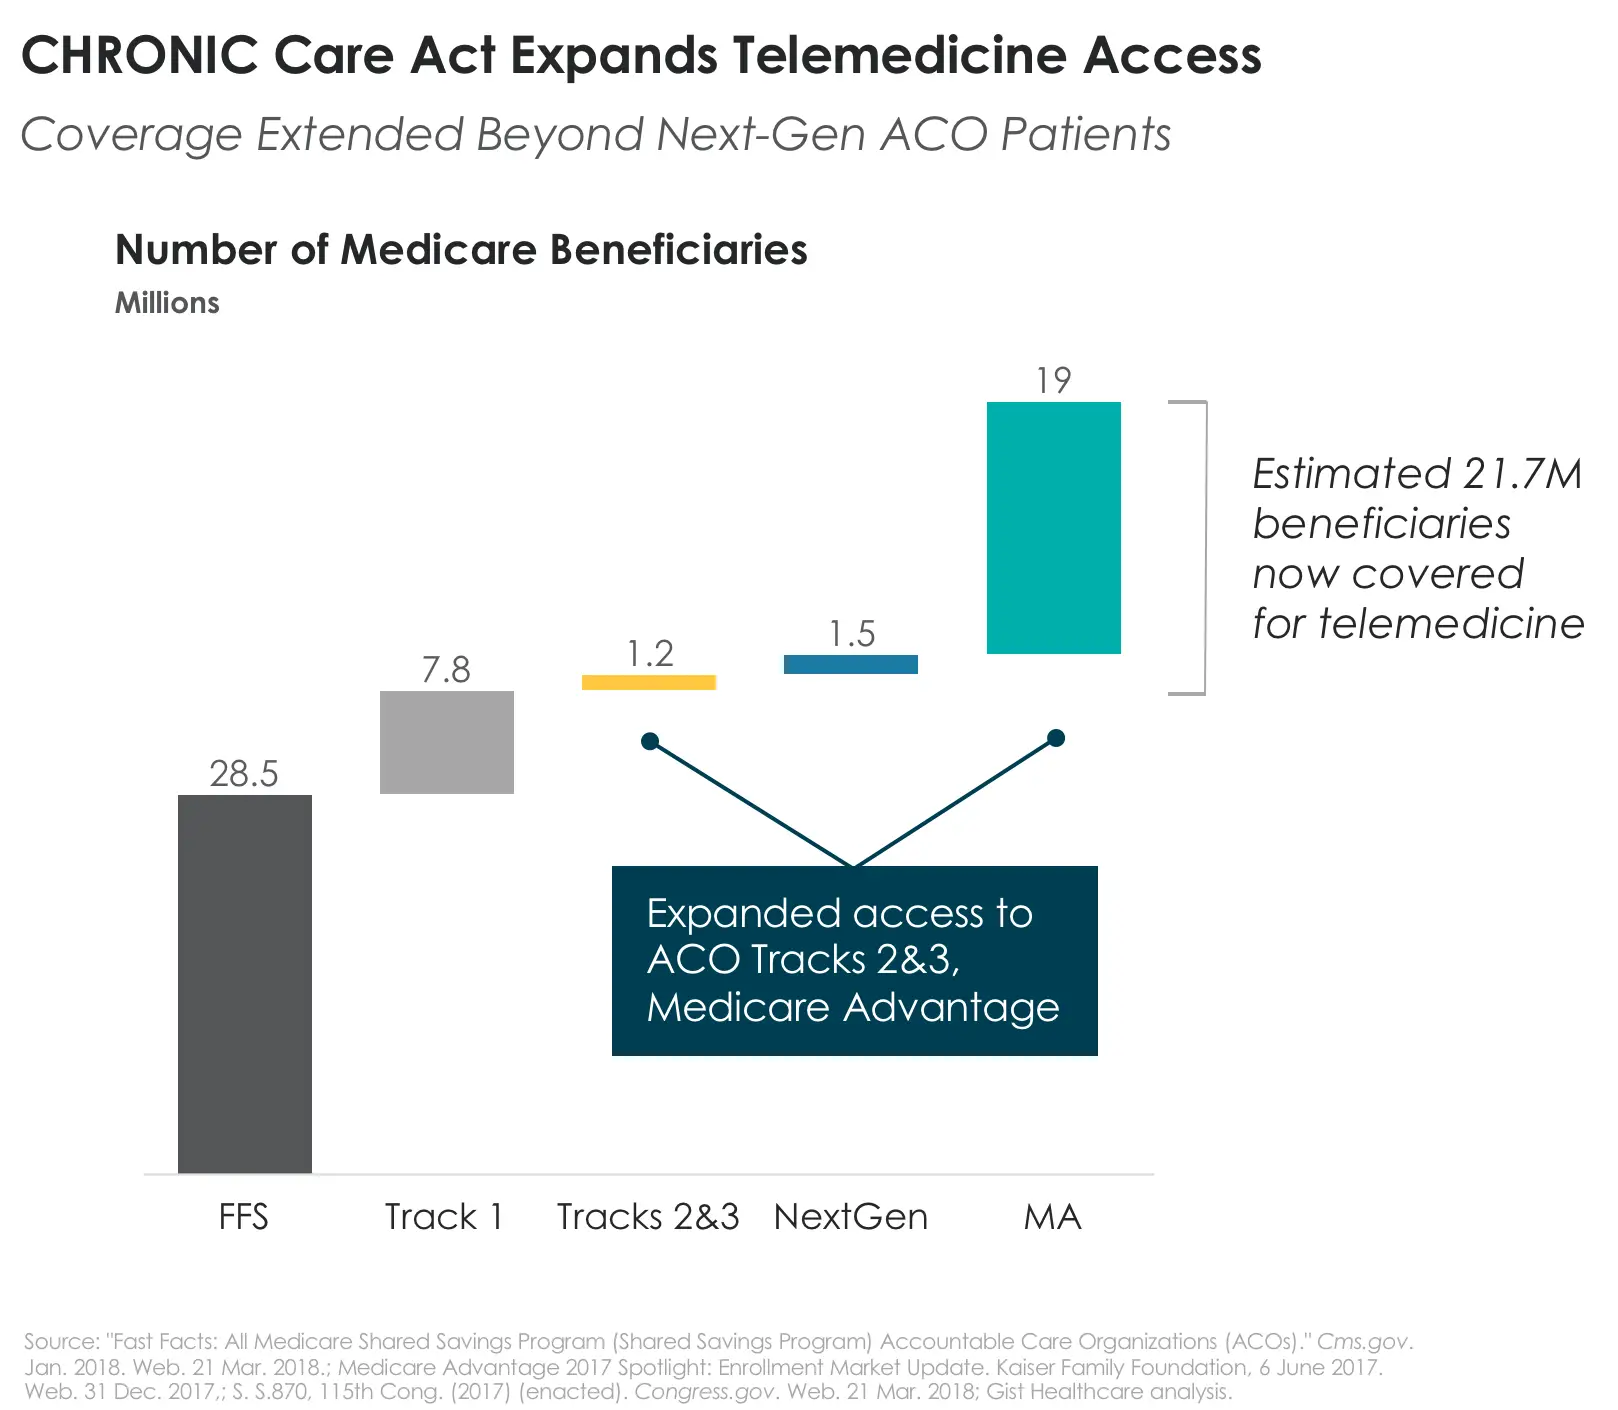 Telemedicine at a Tipping Point